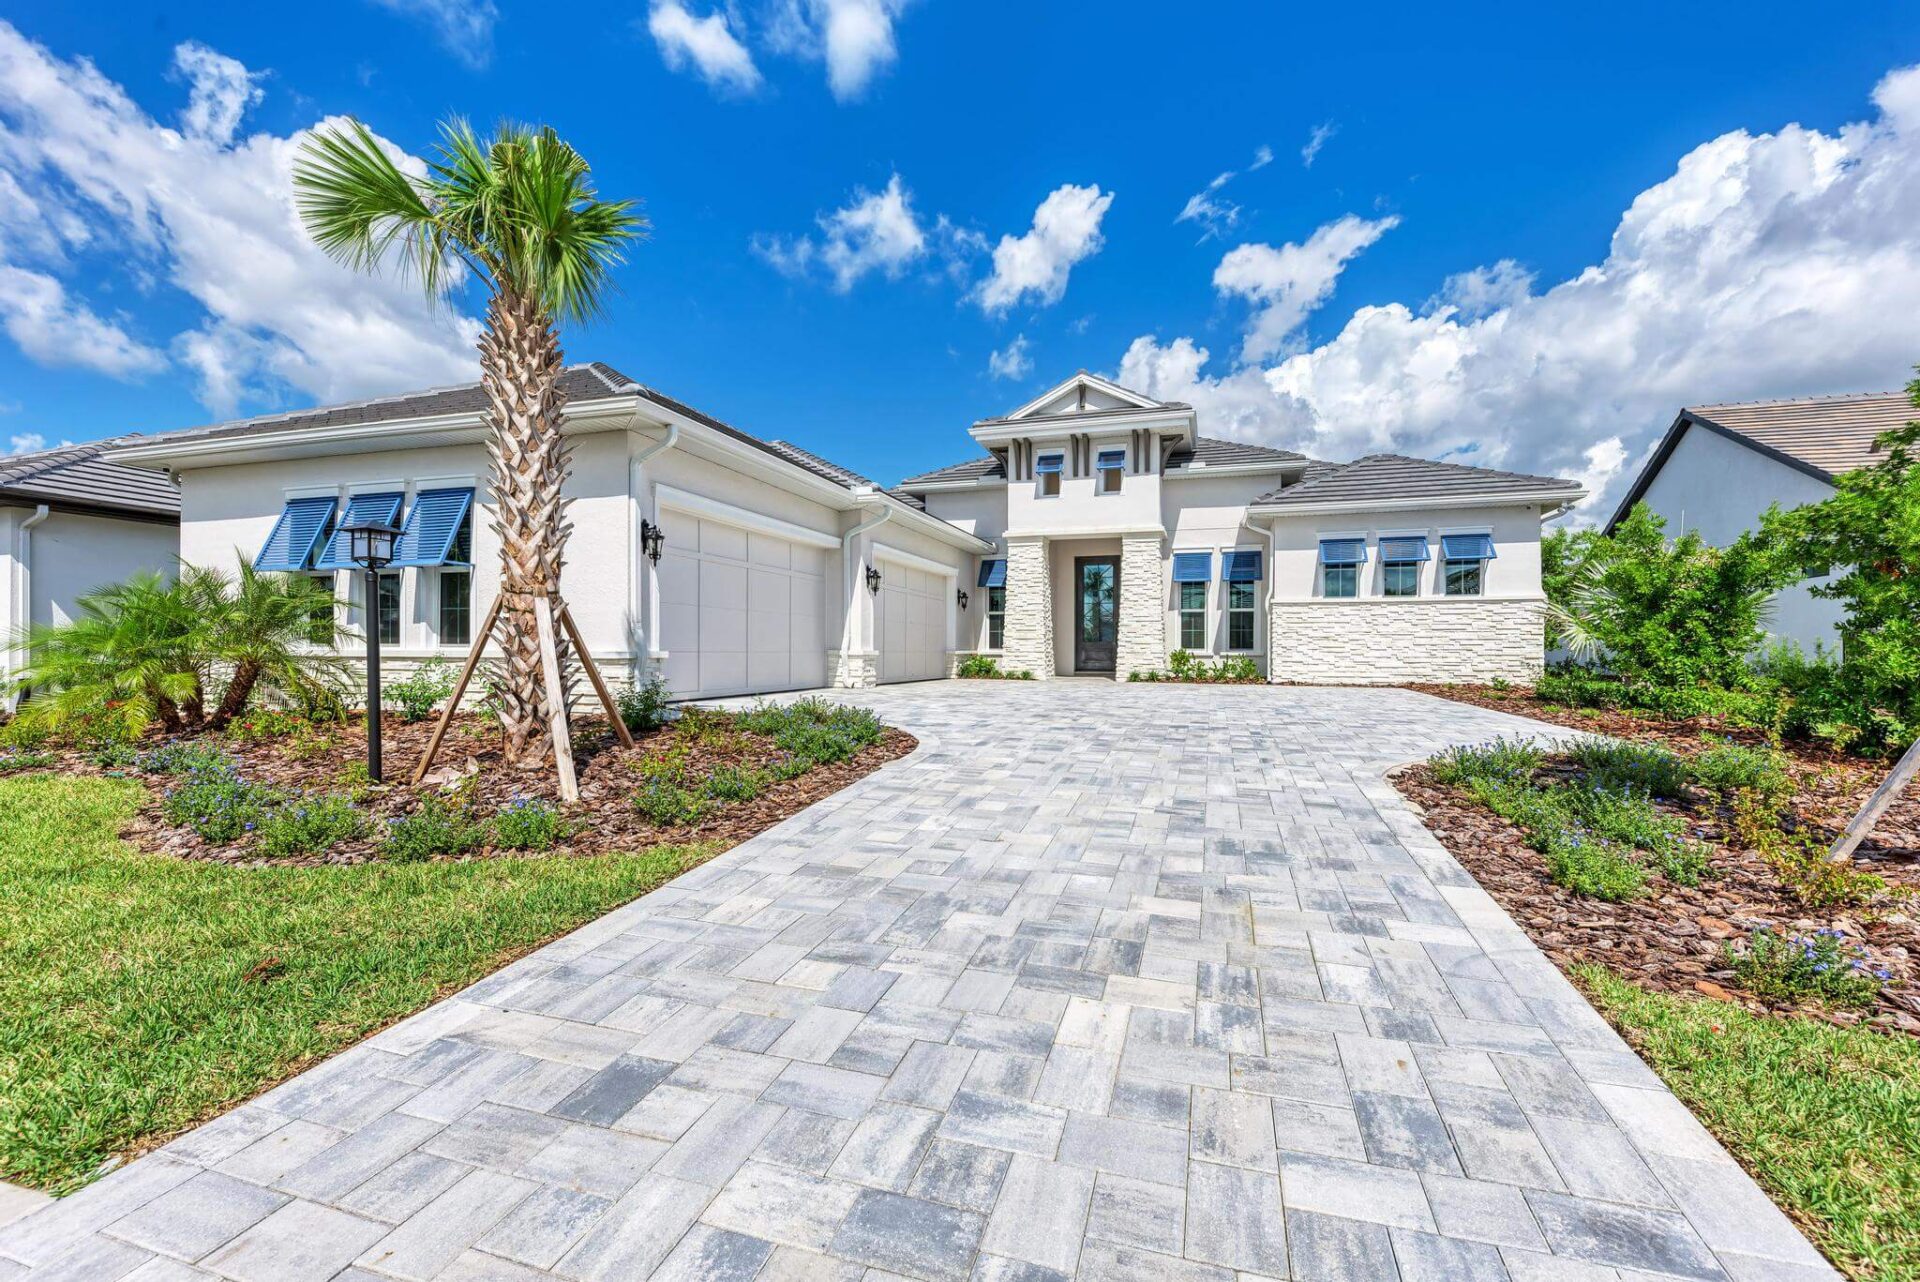 Experience the Mainstay II One Story Model home in Lakewood Ranch, FL.